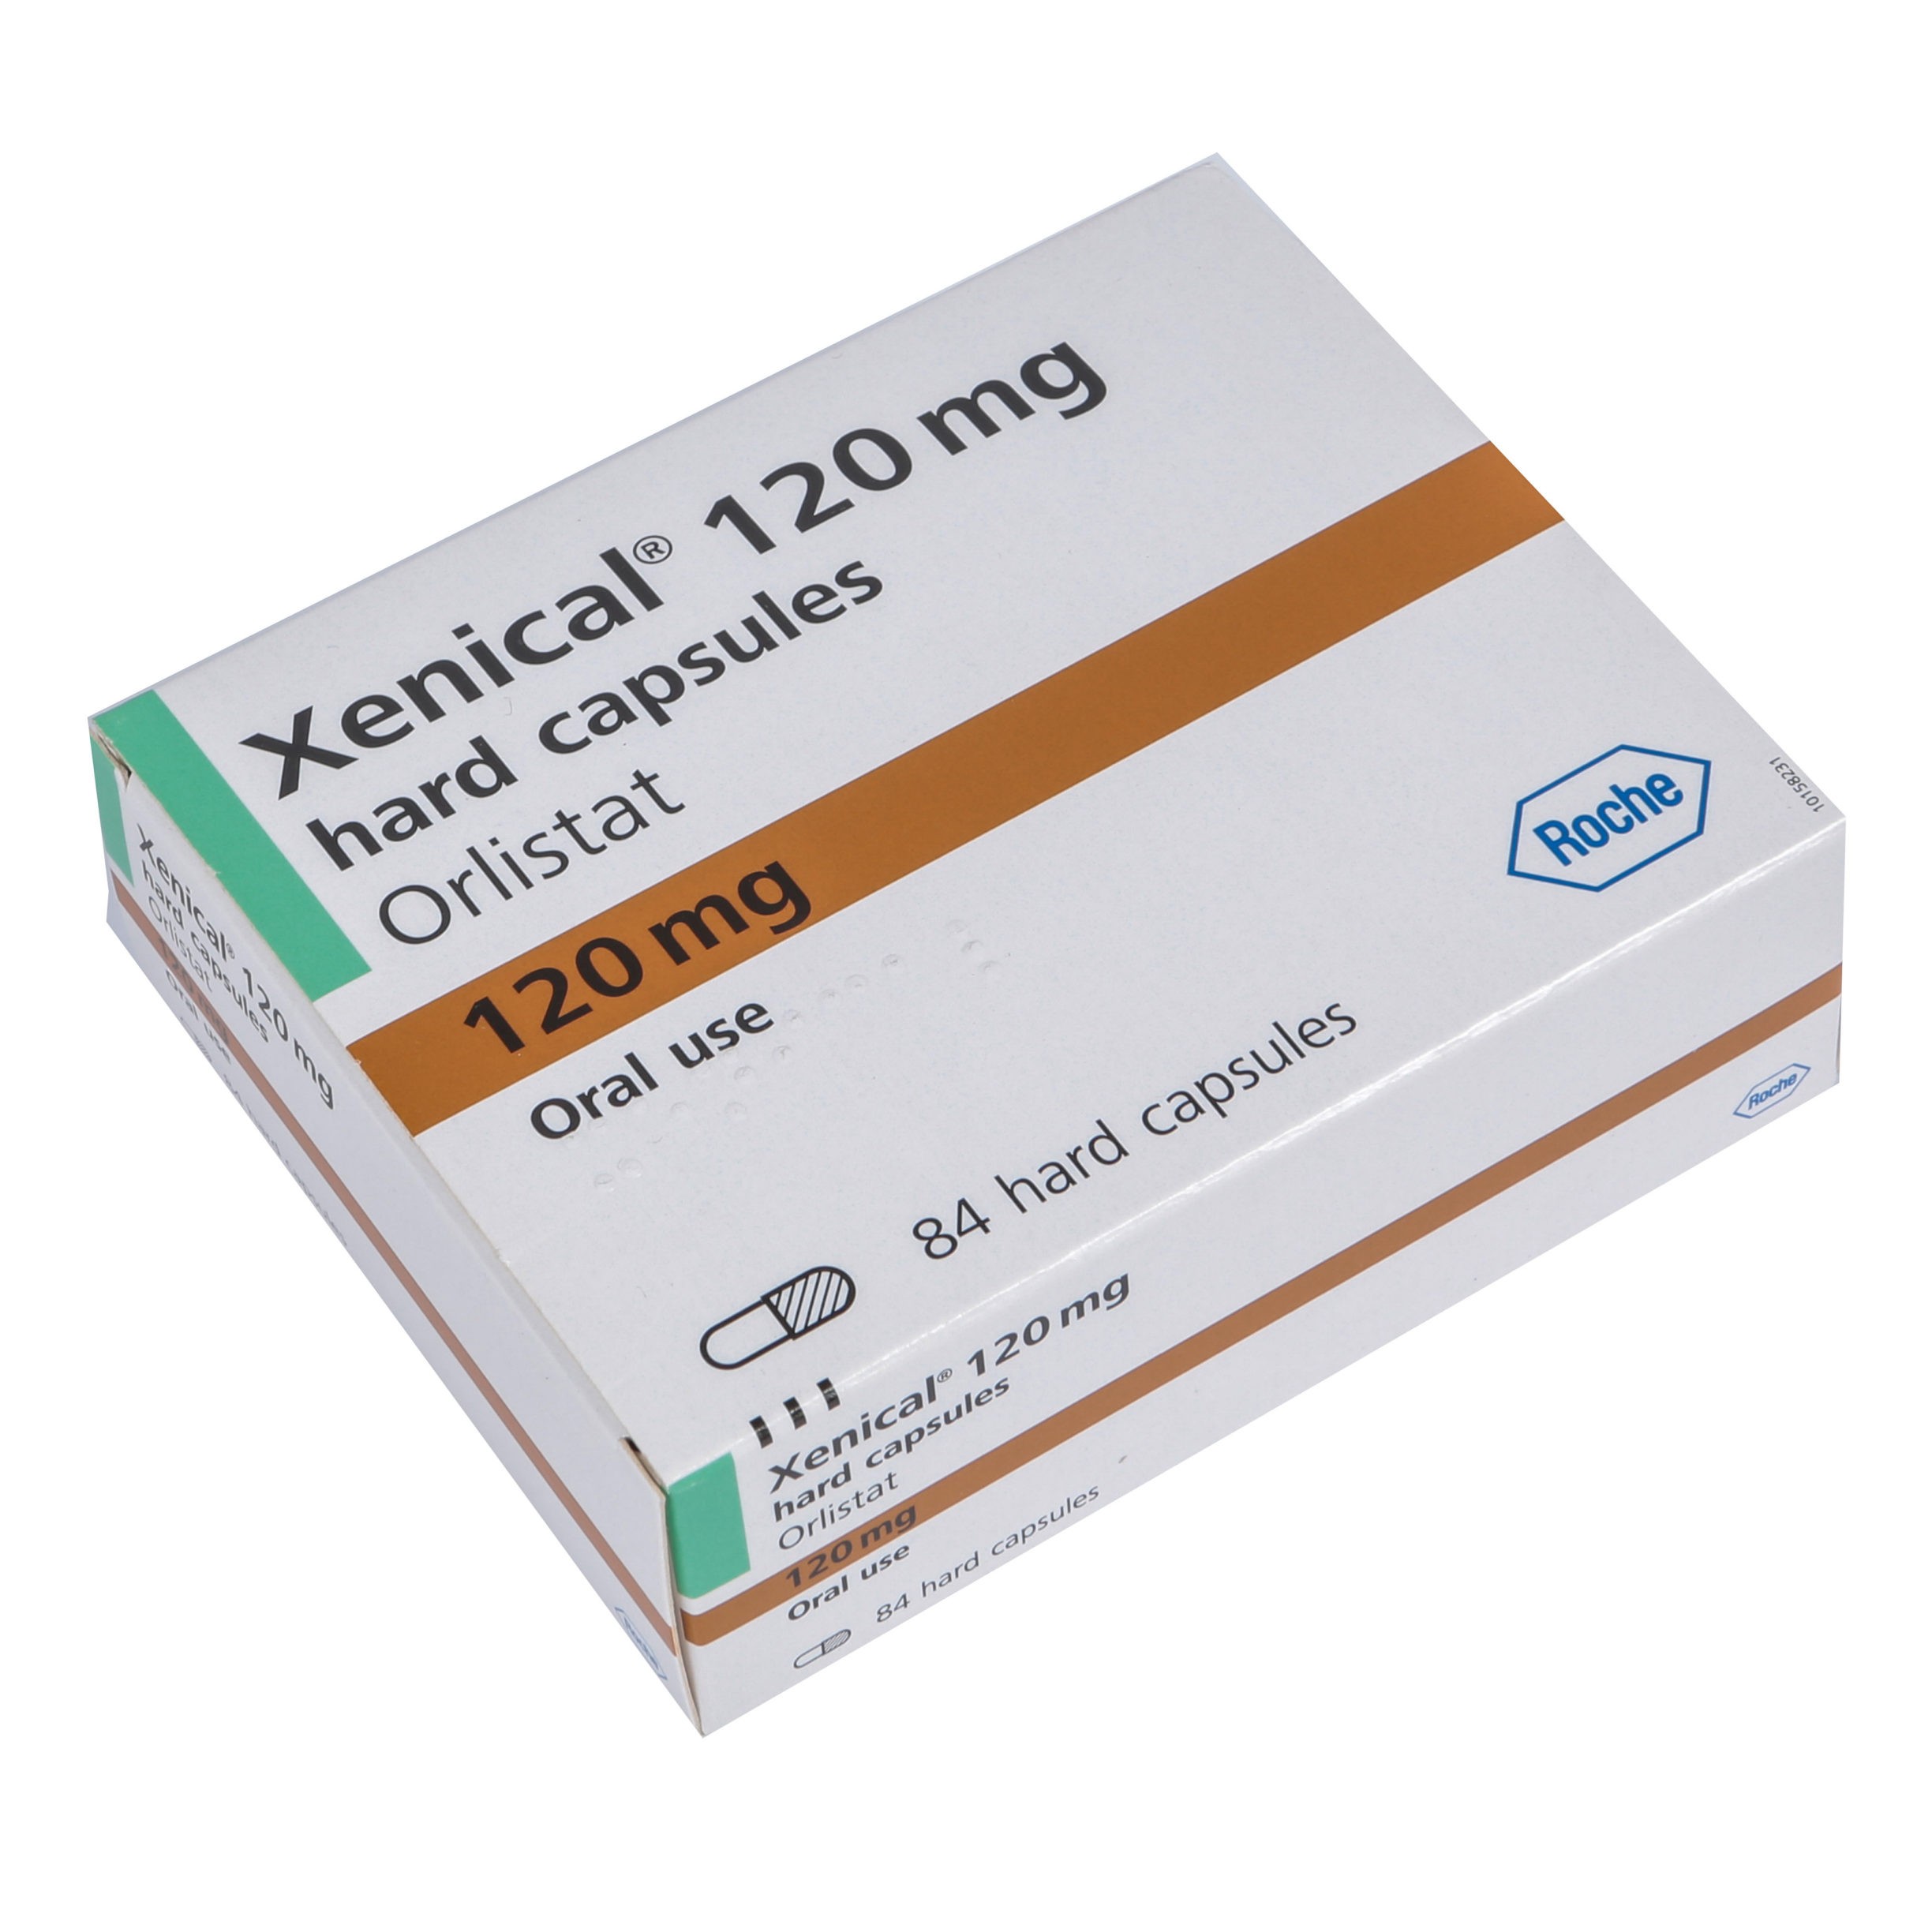 Xenical 120mg Capsules (84 Capsules)